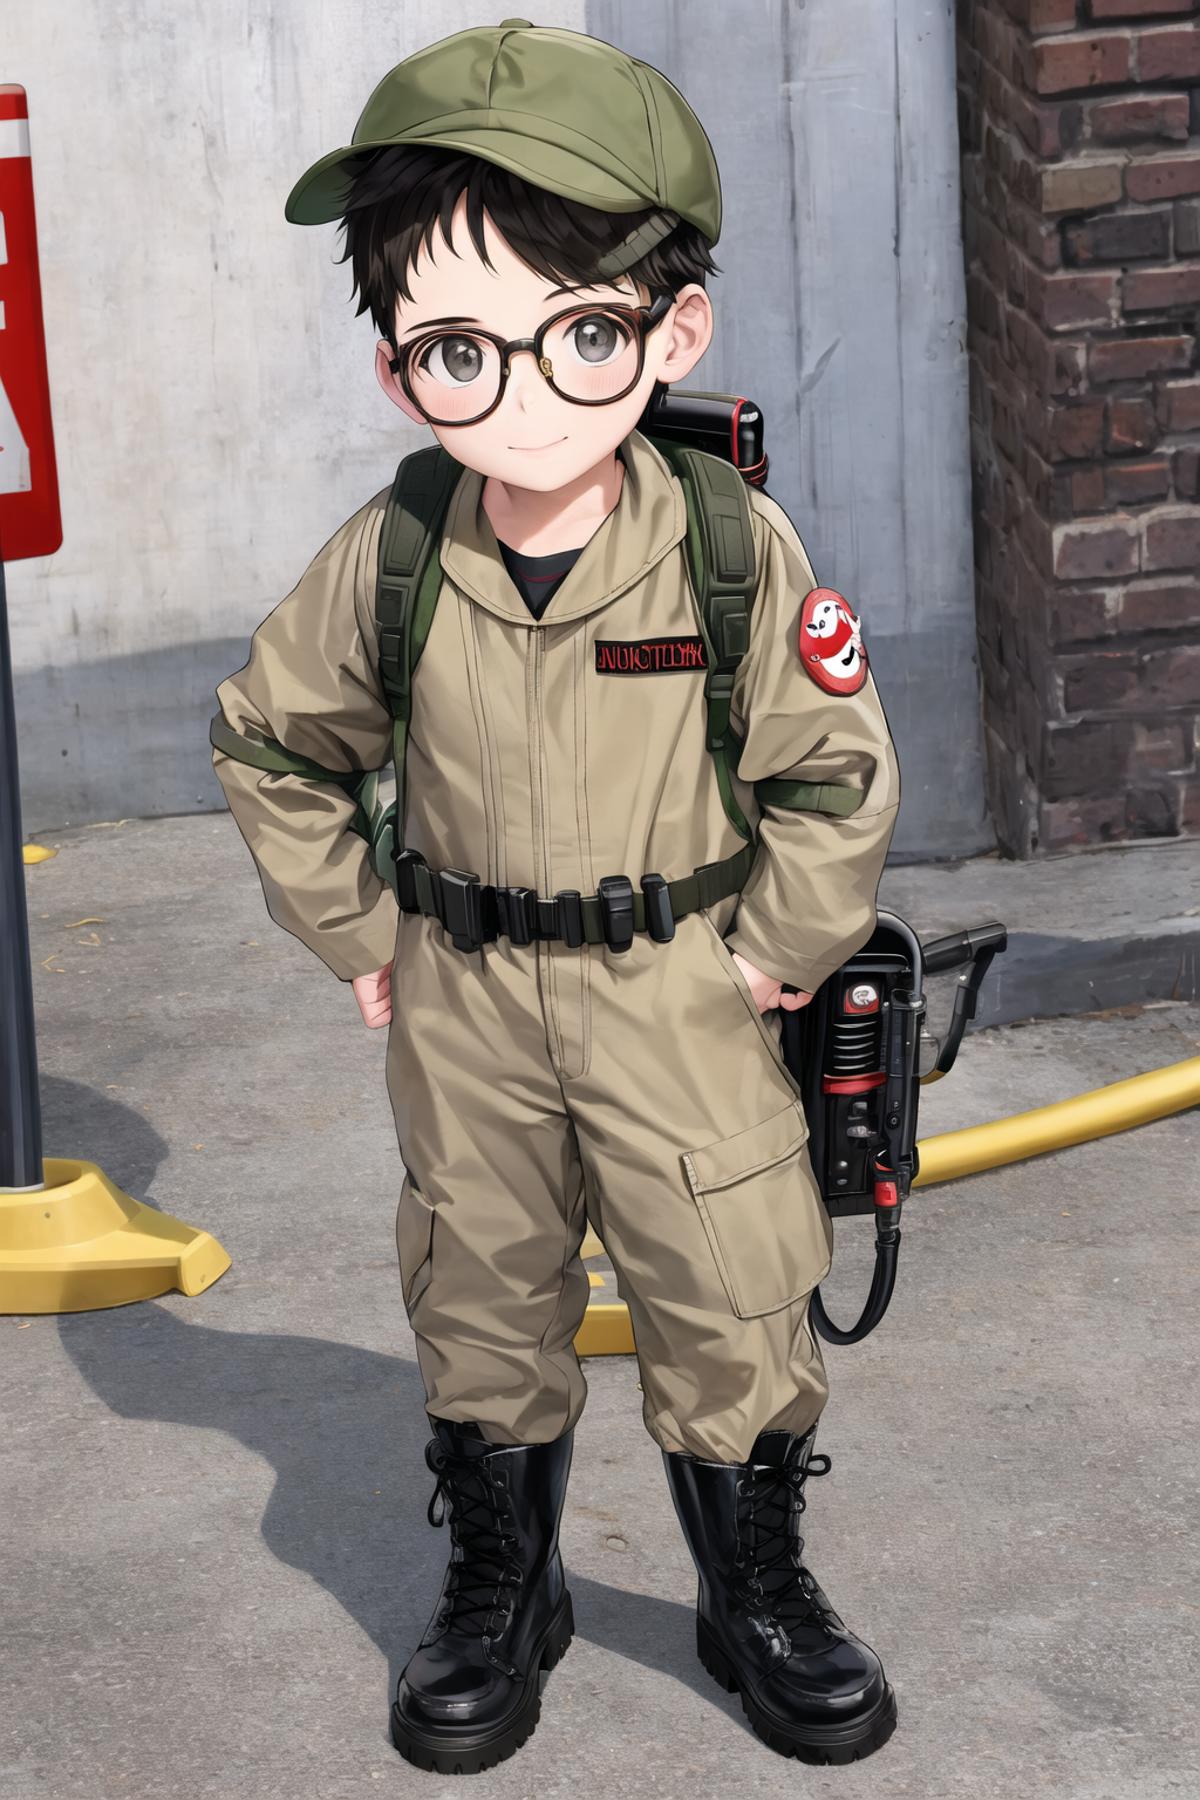 Ghostbuster Uniforms image by rulles